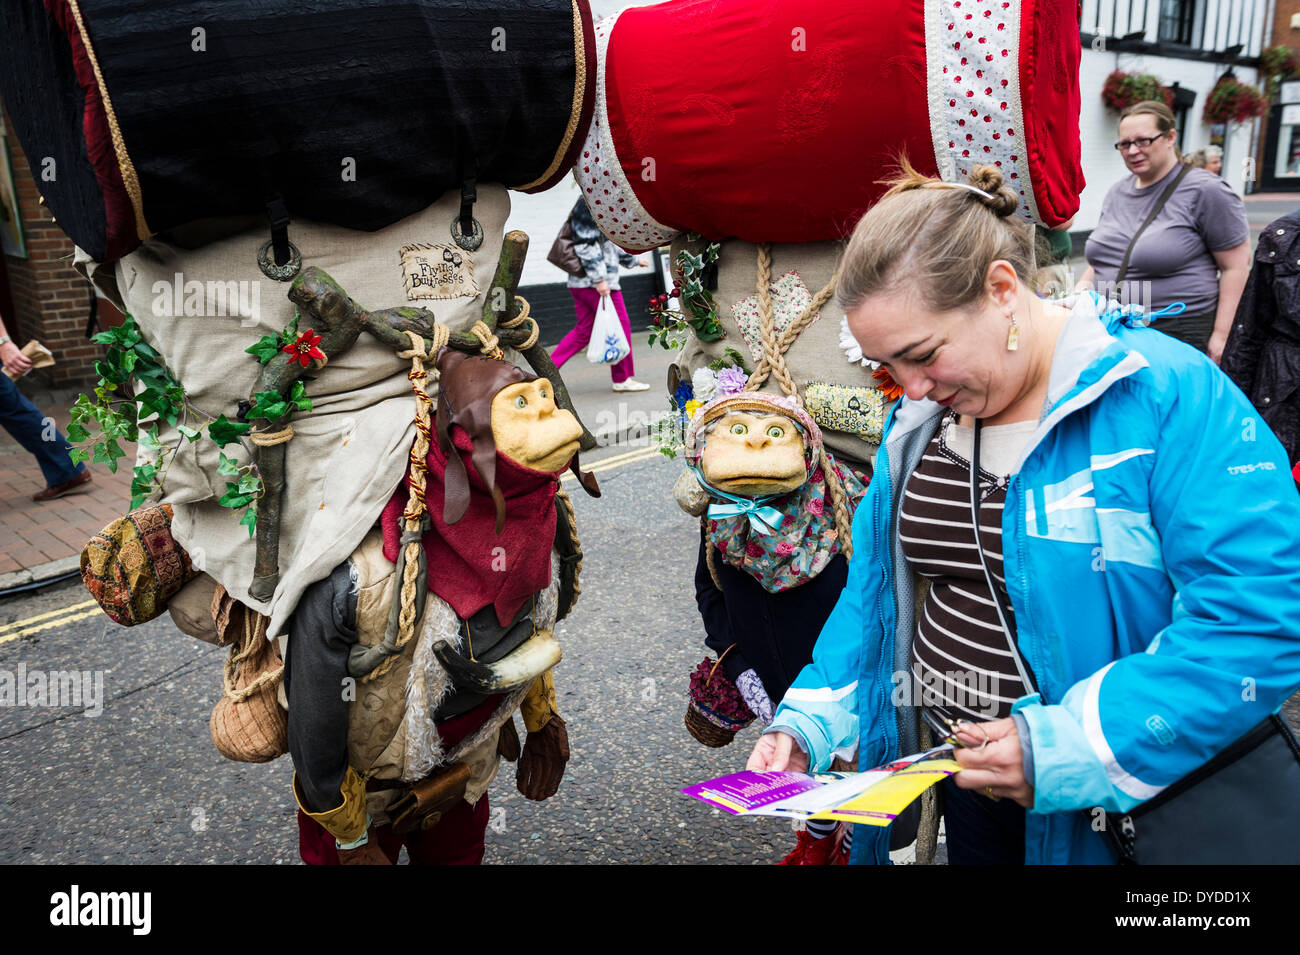 Two performers at the Witham International Puppet Festival chat to a member of the public. Stock Photo